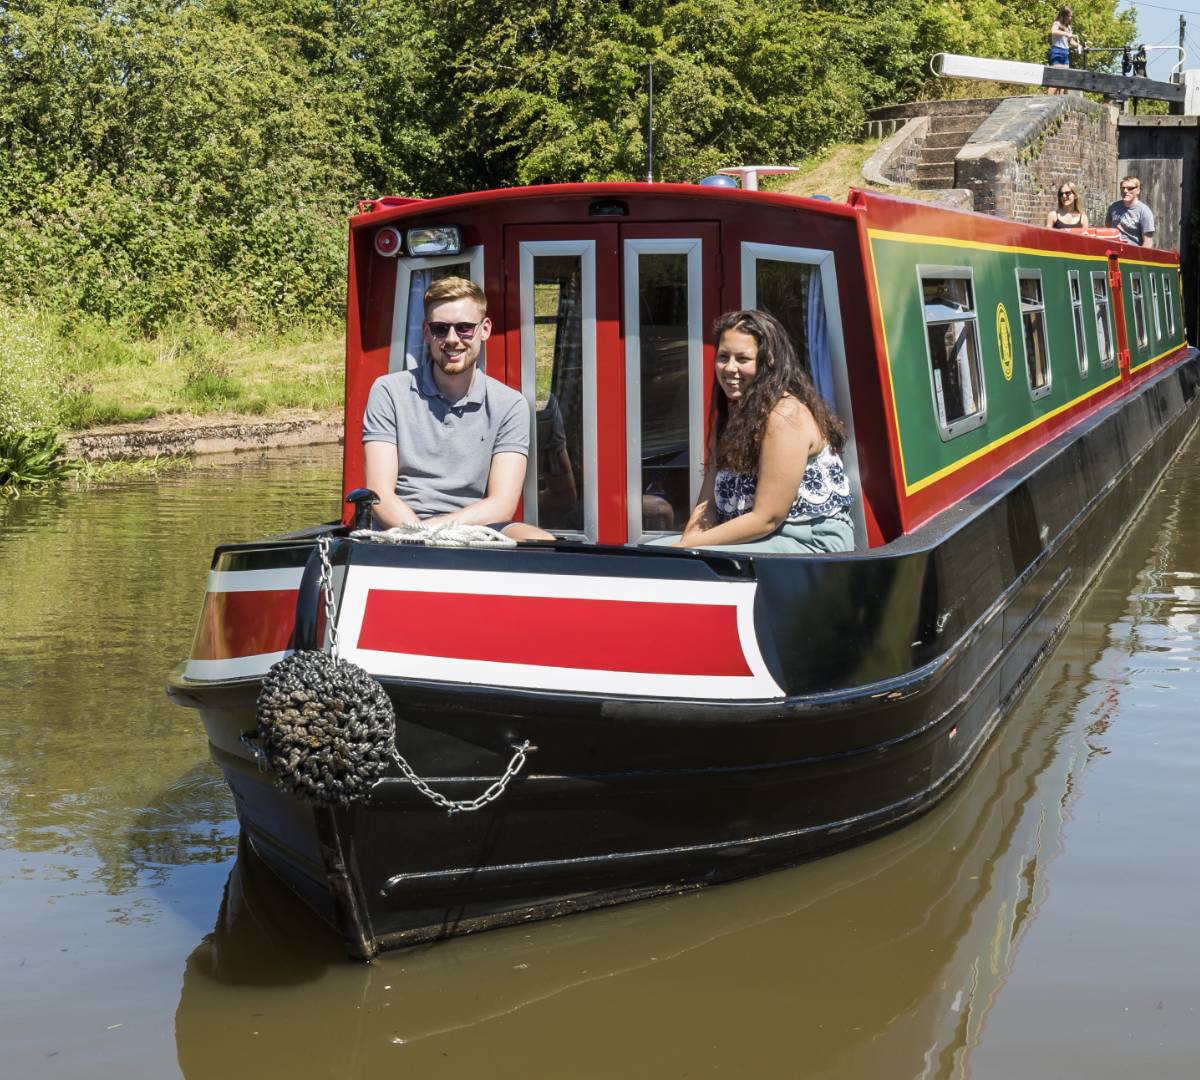 The Common Tern canal boat.  This boat is a Tern boat class